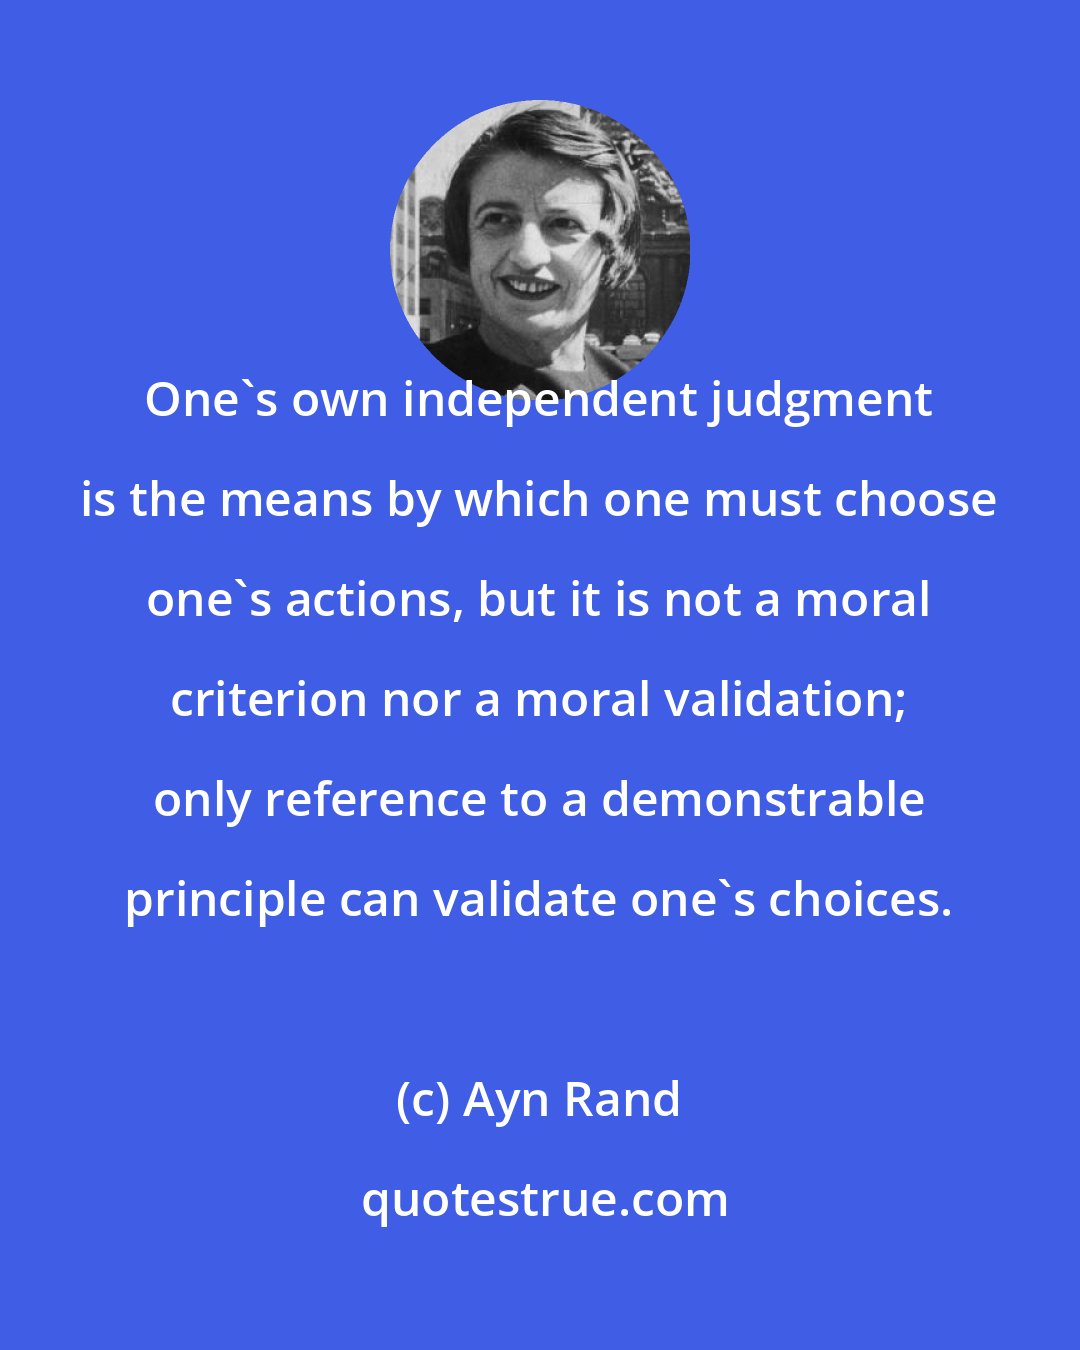 Ayn Rand: One's own independent judgment is the means by which one must choose one's actions, but it is not a moral criterion nor a moral validation; only reference to a demonstrable principle can validate one's choices.